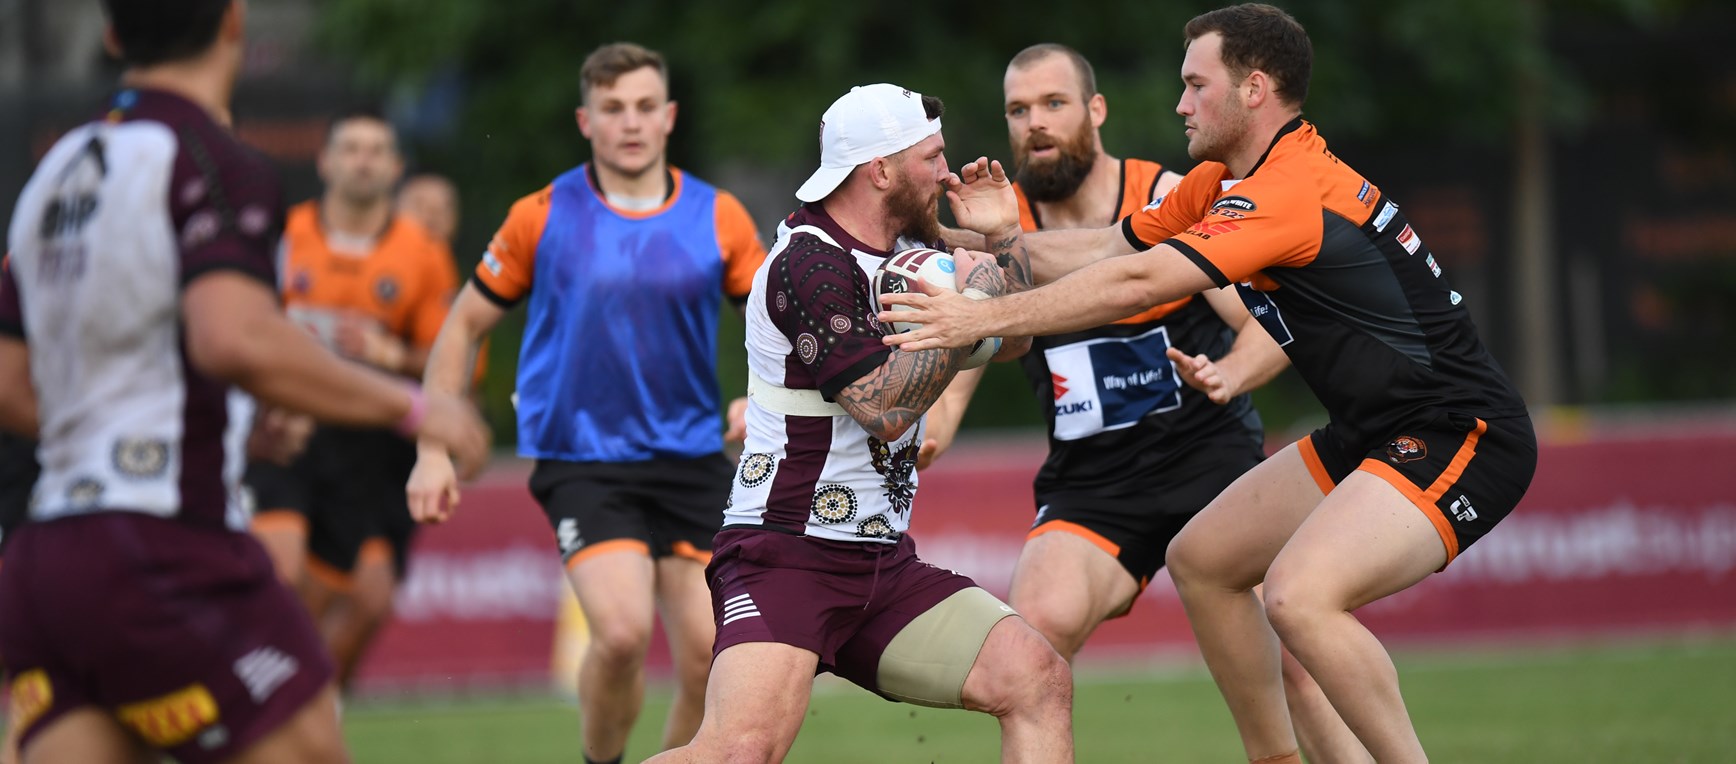 In pictures: Maroons oppose Easts Tigers